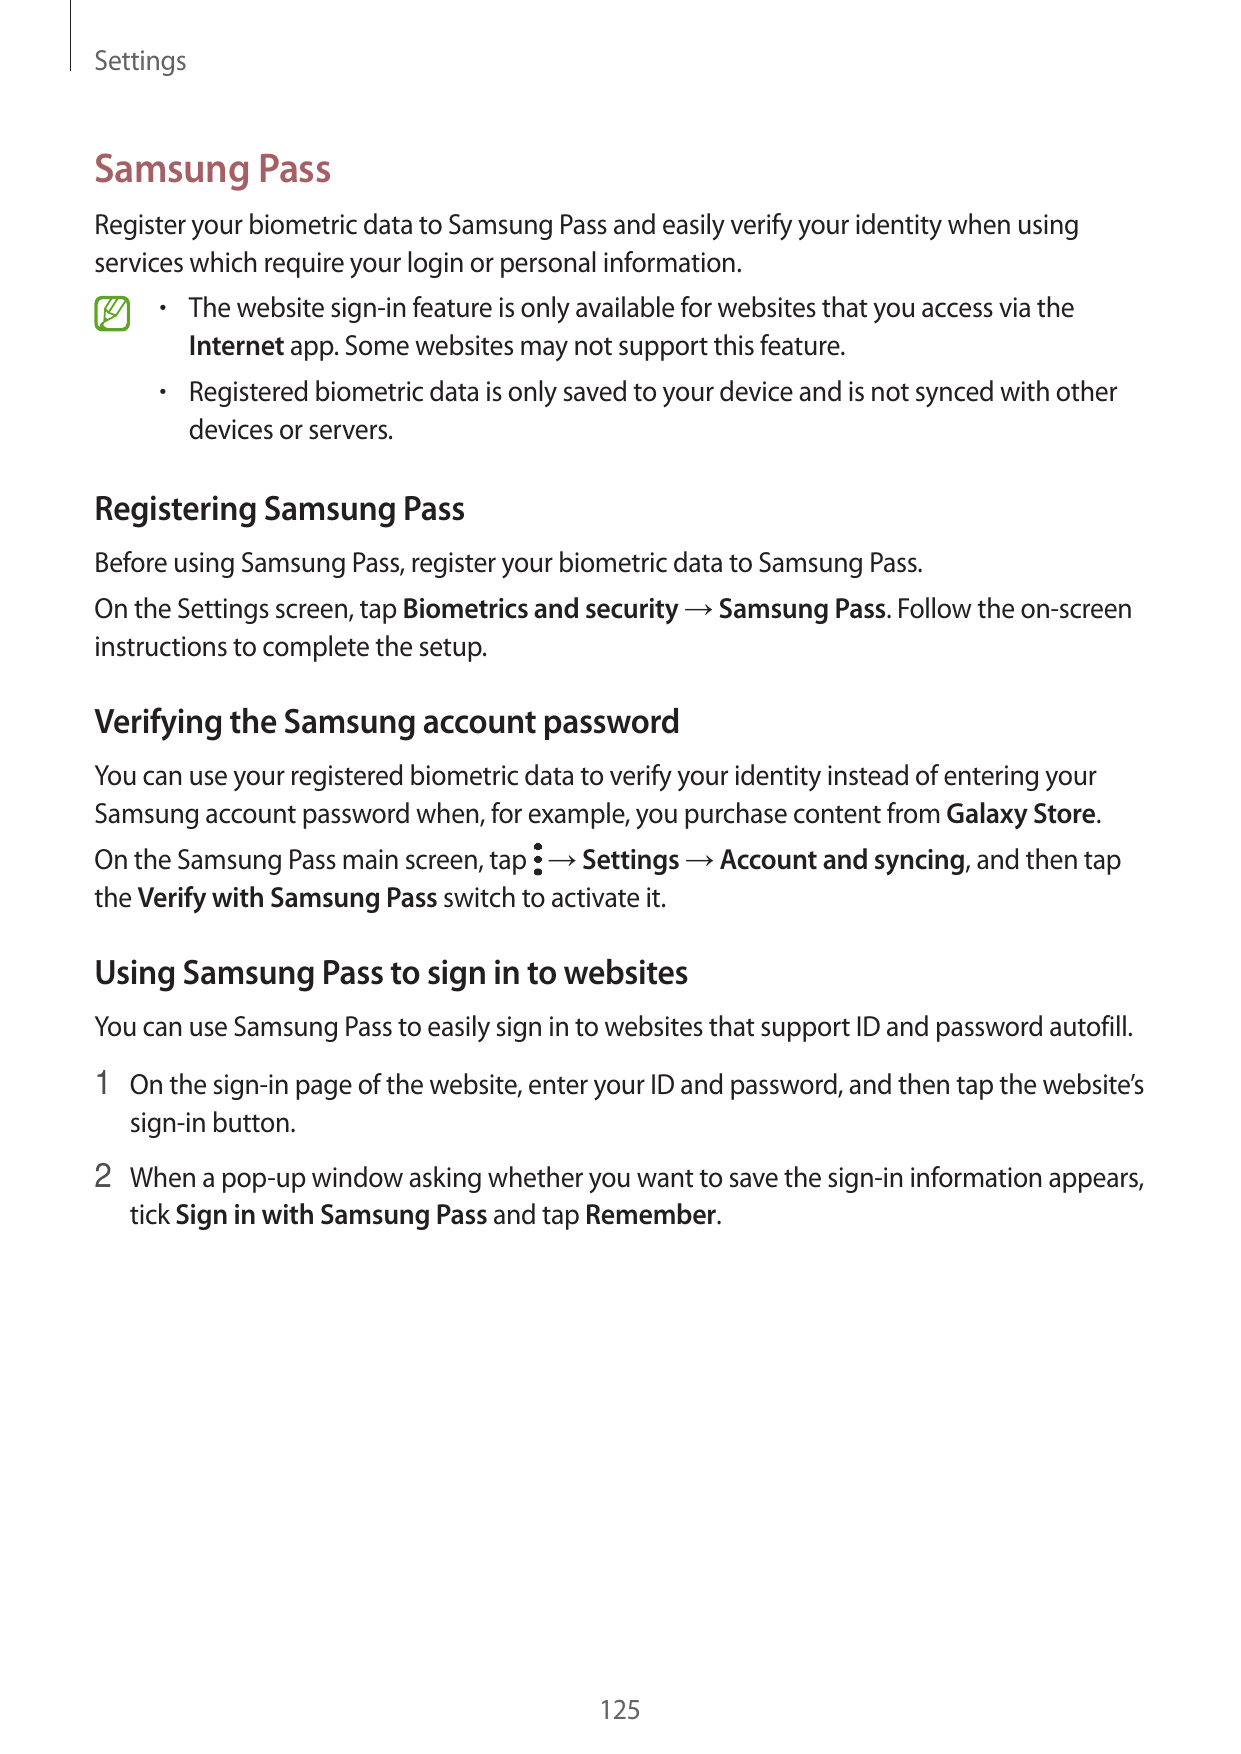 SettingsSamsung PassRegister your biometric data to Samsung Pass and easily verify your identity when usingservices which requir